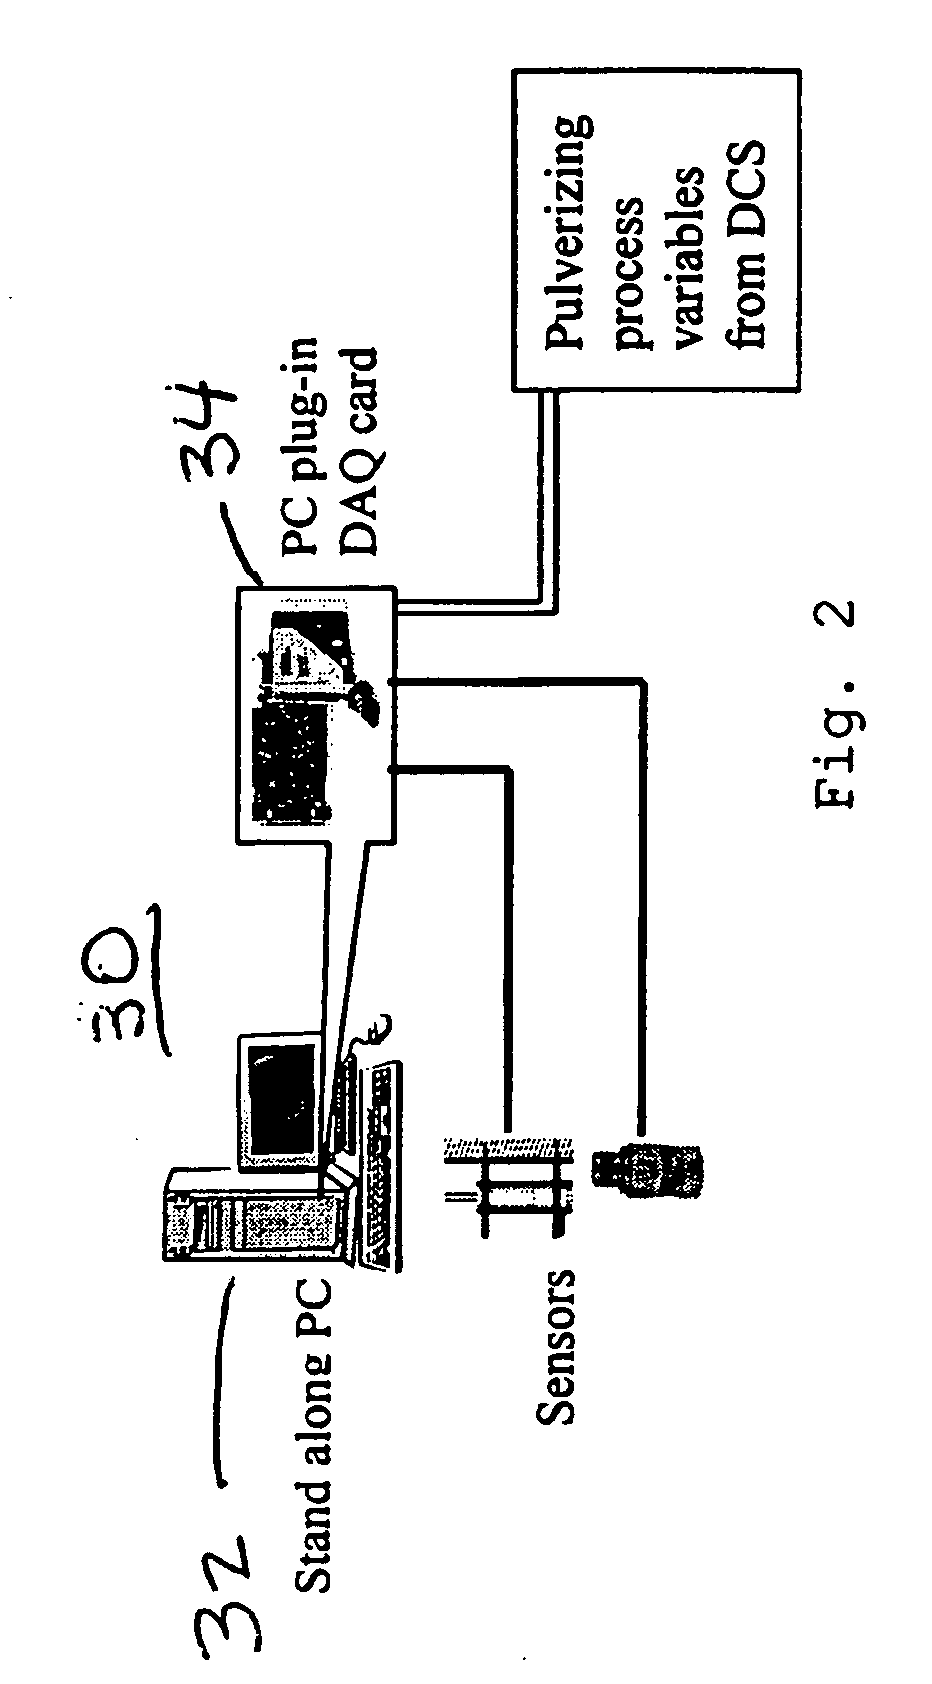 Method and apparatus for solid fuel pulverizing operation and maintenance optimization